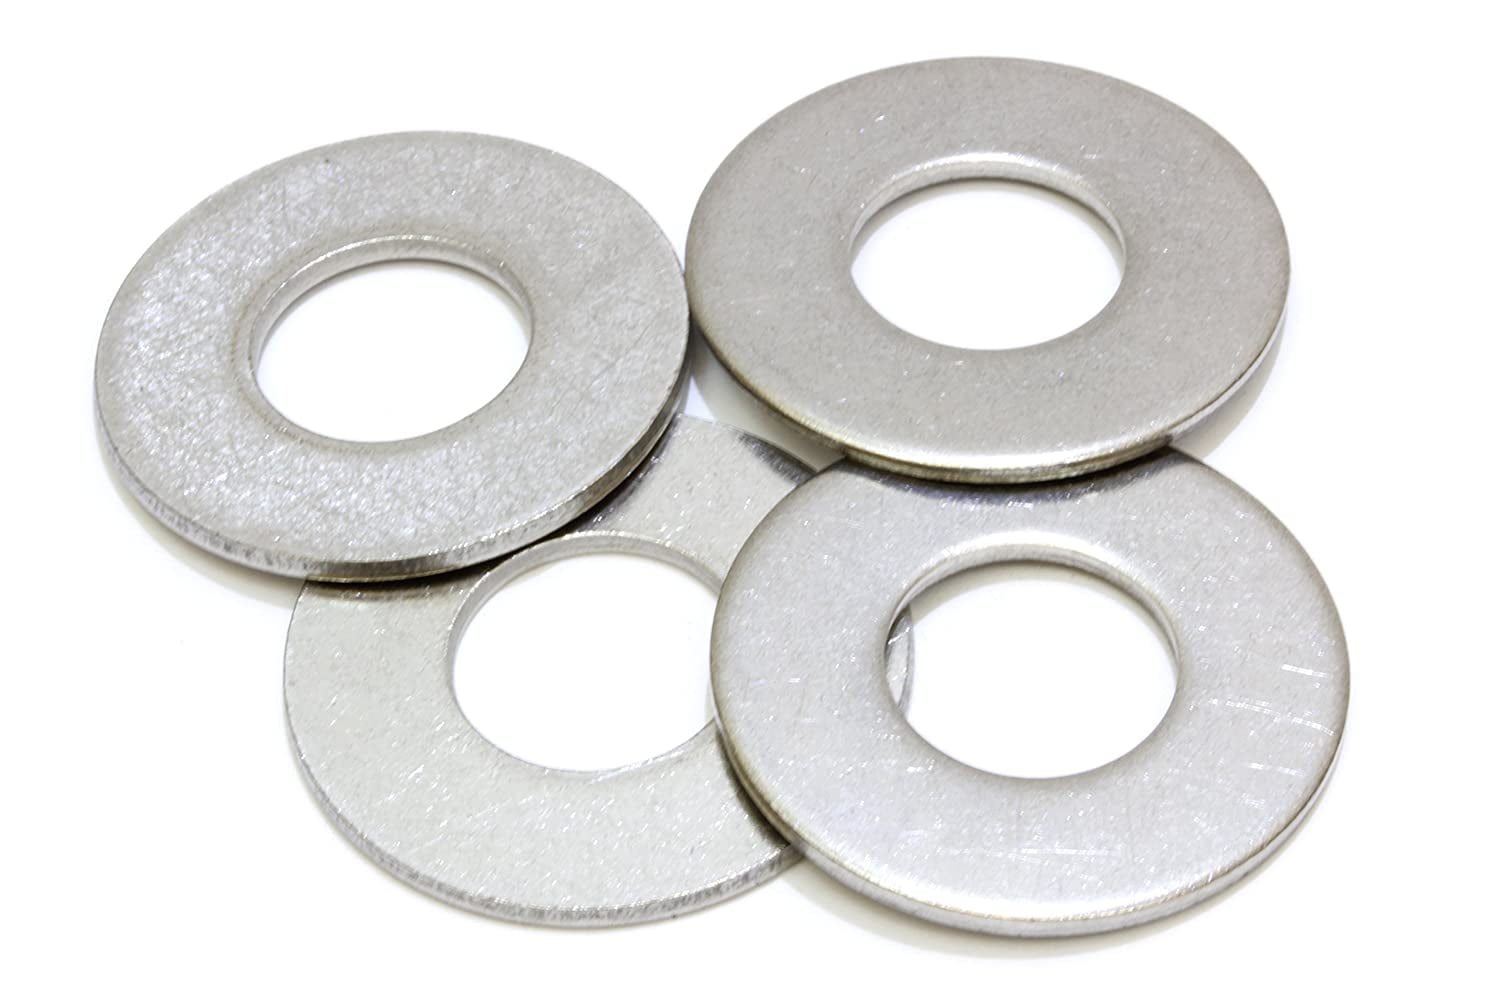 3/8" 304 Stainless Steel Spring Washer Box of 100 